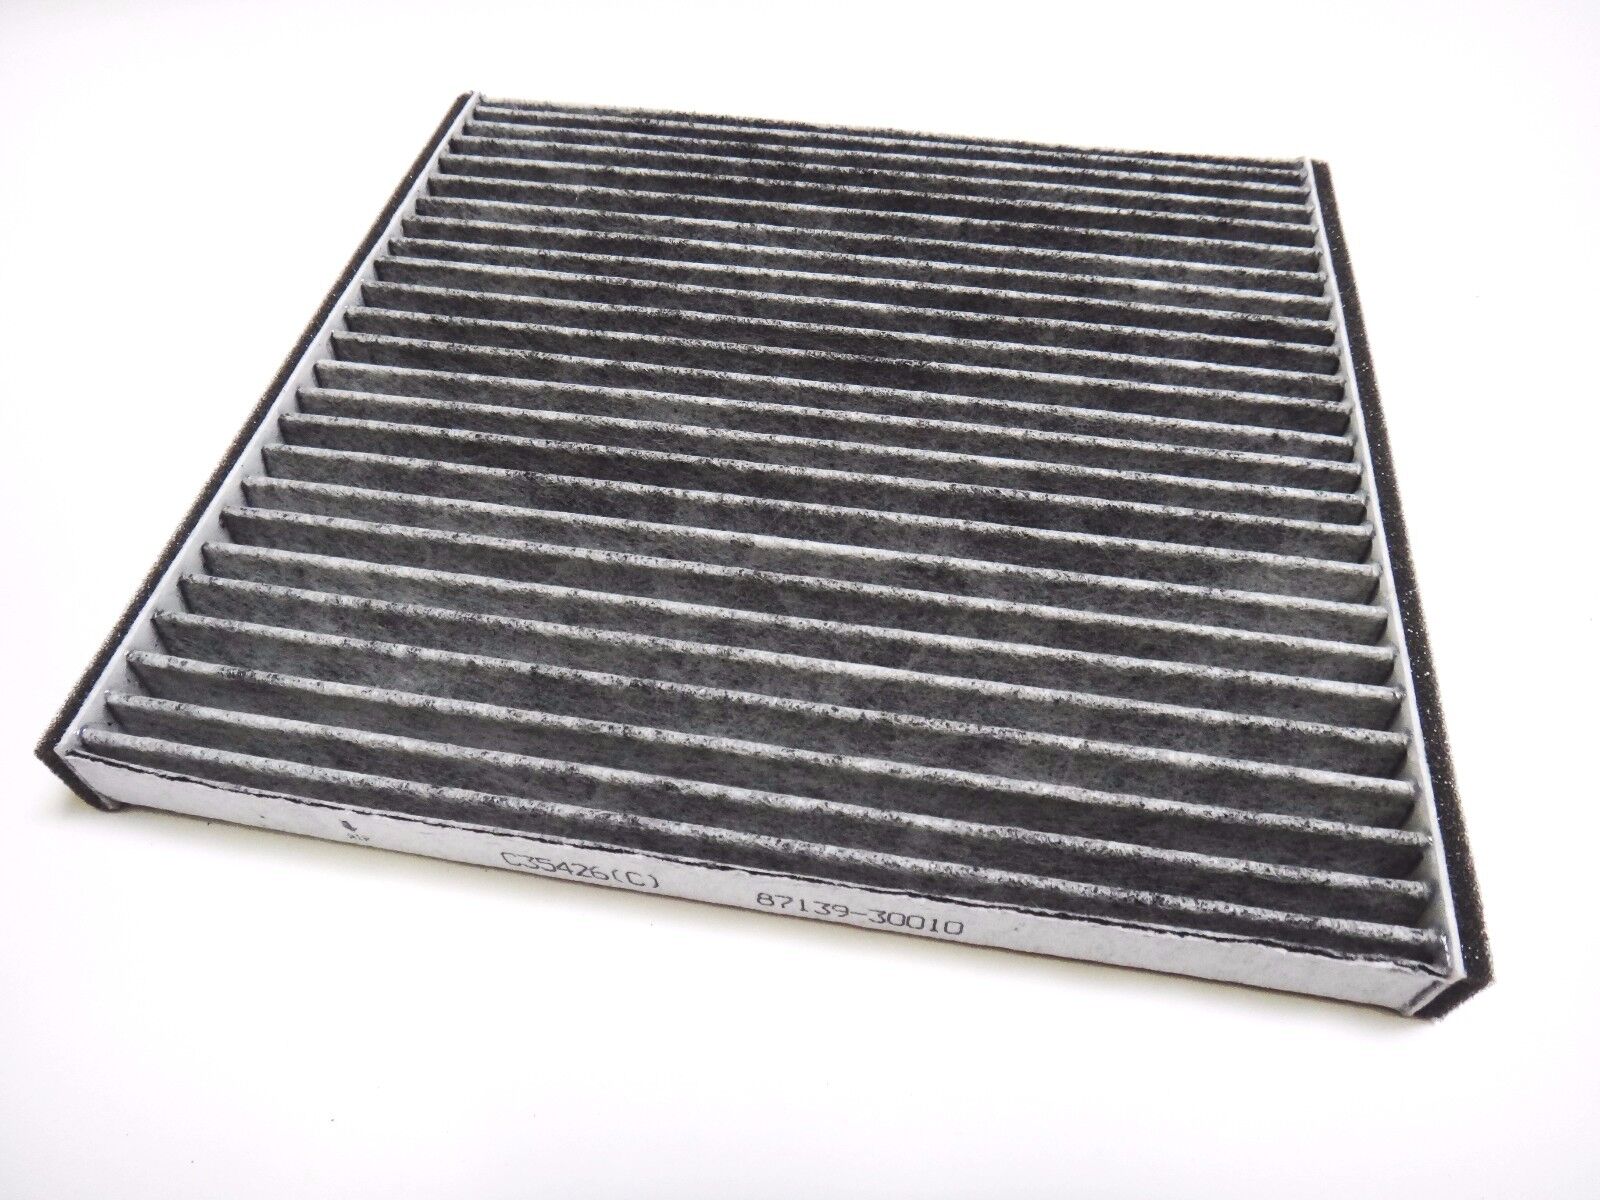 C35426 GS300 GS400 1998-2000 CHARCOAL CARBONIZED AC CABIN AIR FILTER CF8769